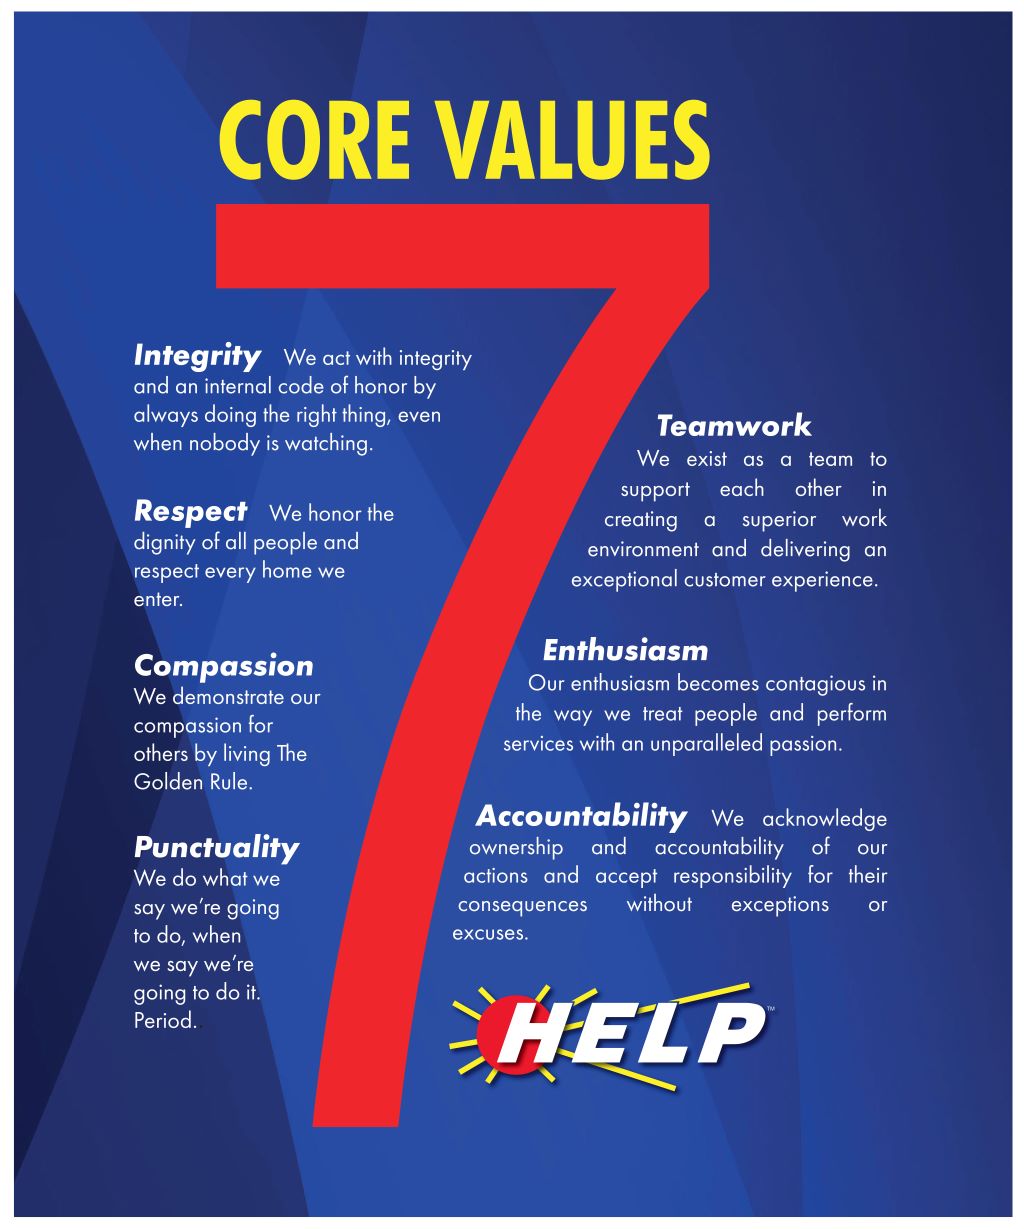 HELP 7 core values pdf including integrity teamwork enthusiasm repsect compassion